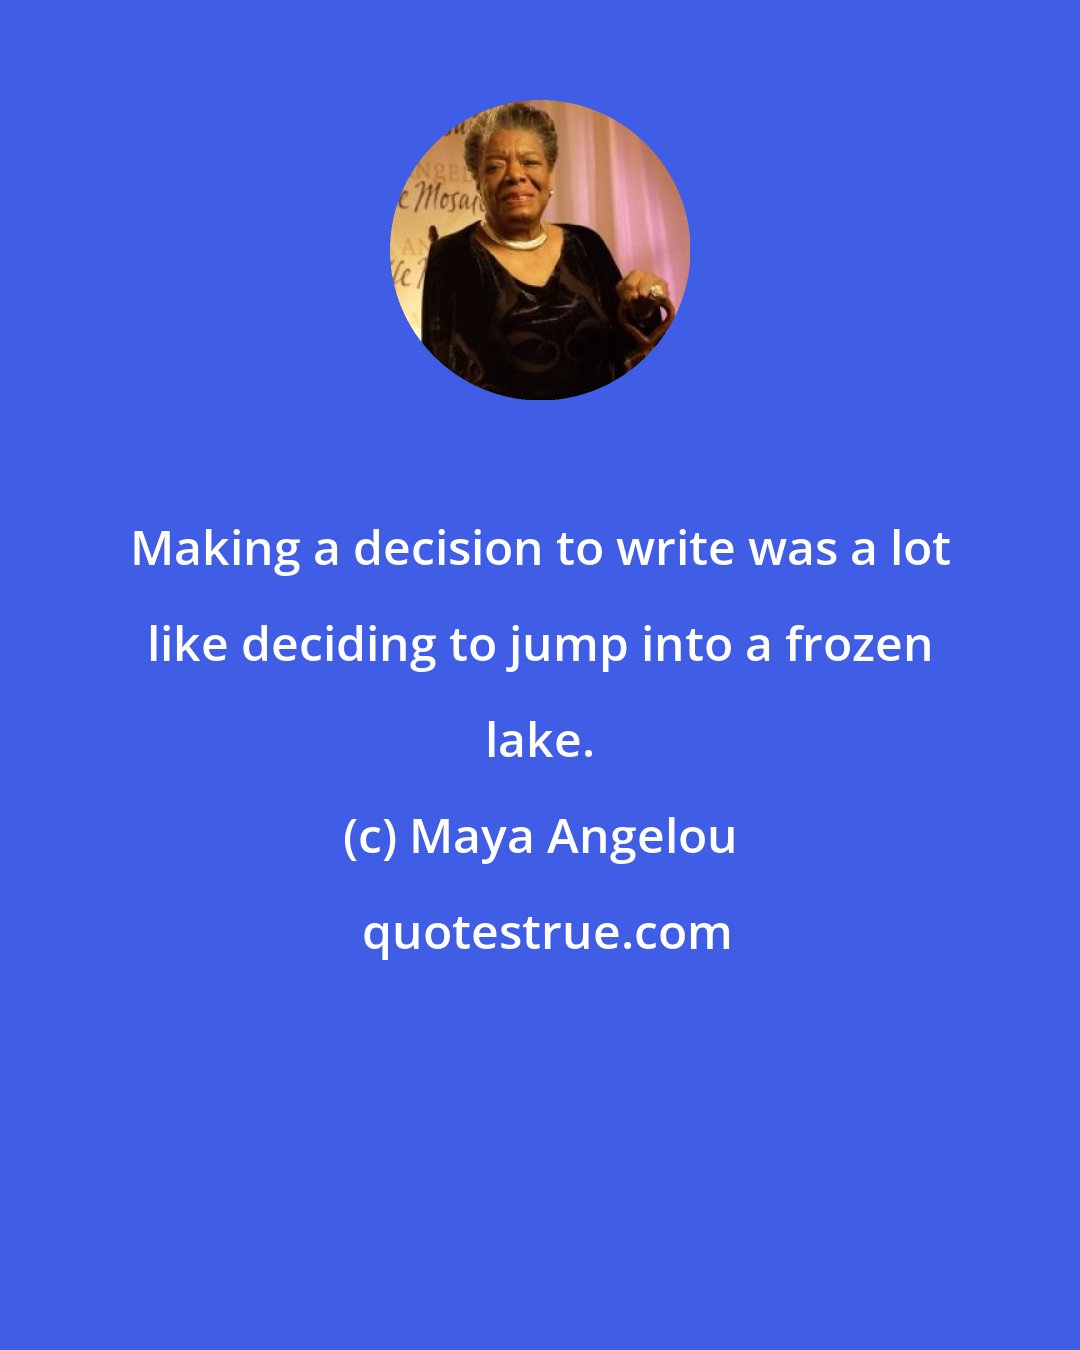 Maya Angelou: Making a decision to write was a lot like deciding to jump into a frozen lake.